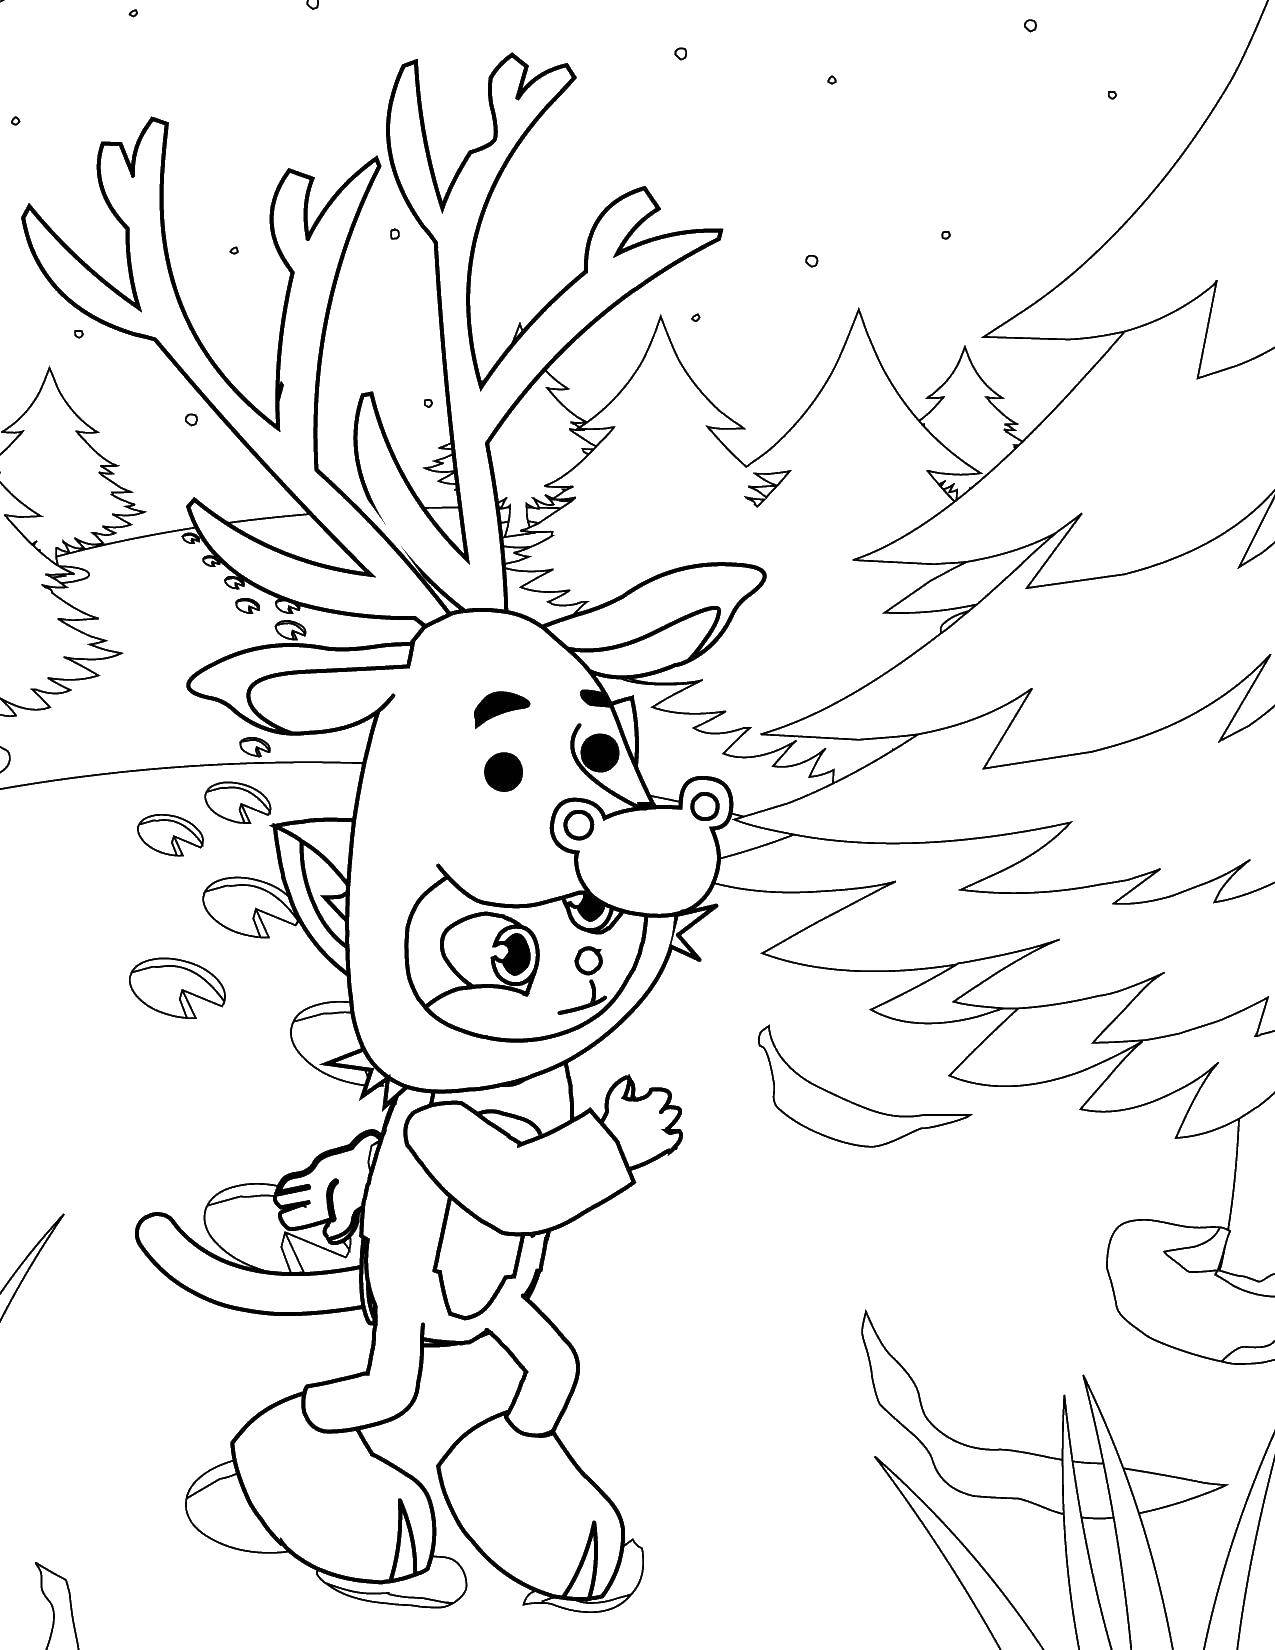 Coloring Cat in a reindeer costume. Category winter. Tags:  winter, Christmas, deer, cat.